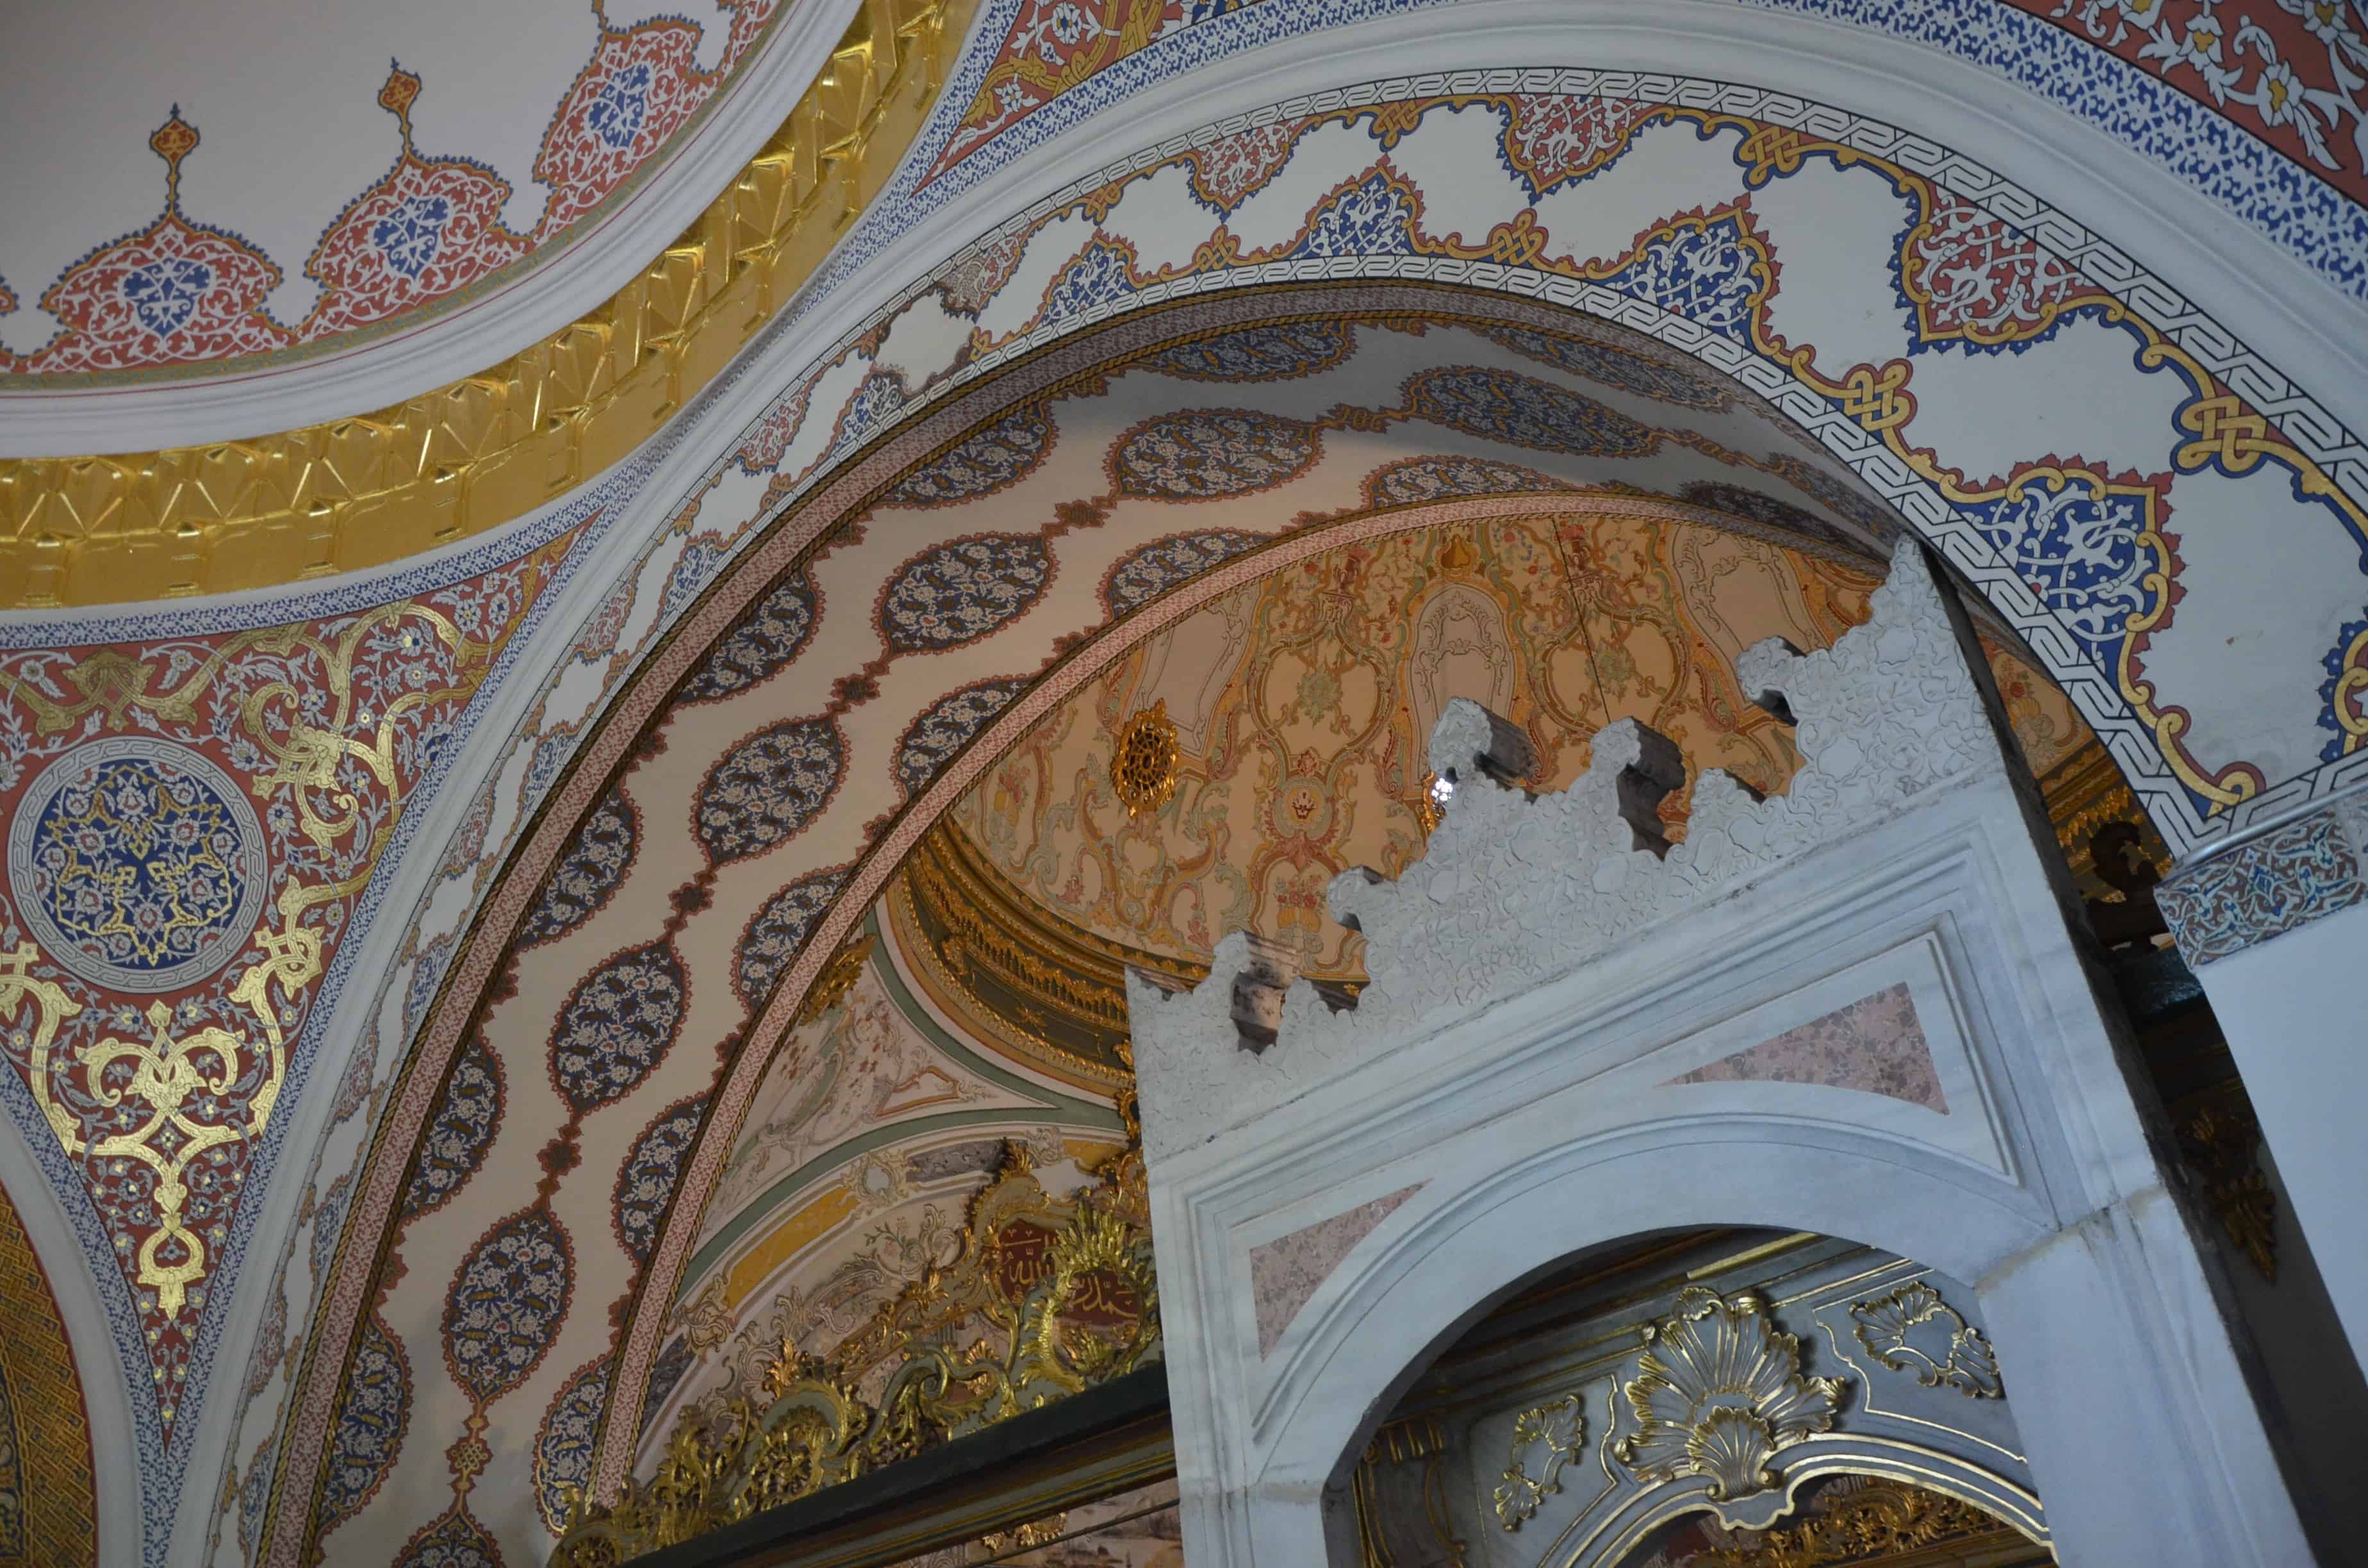 Decorations in the Council Hall at the Imperial Council at Topkapi Palace in Istanbul, Turkey